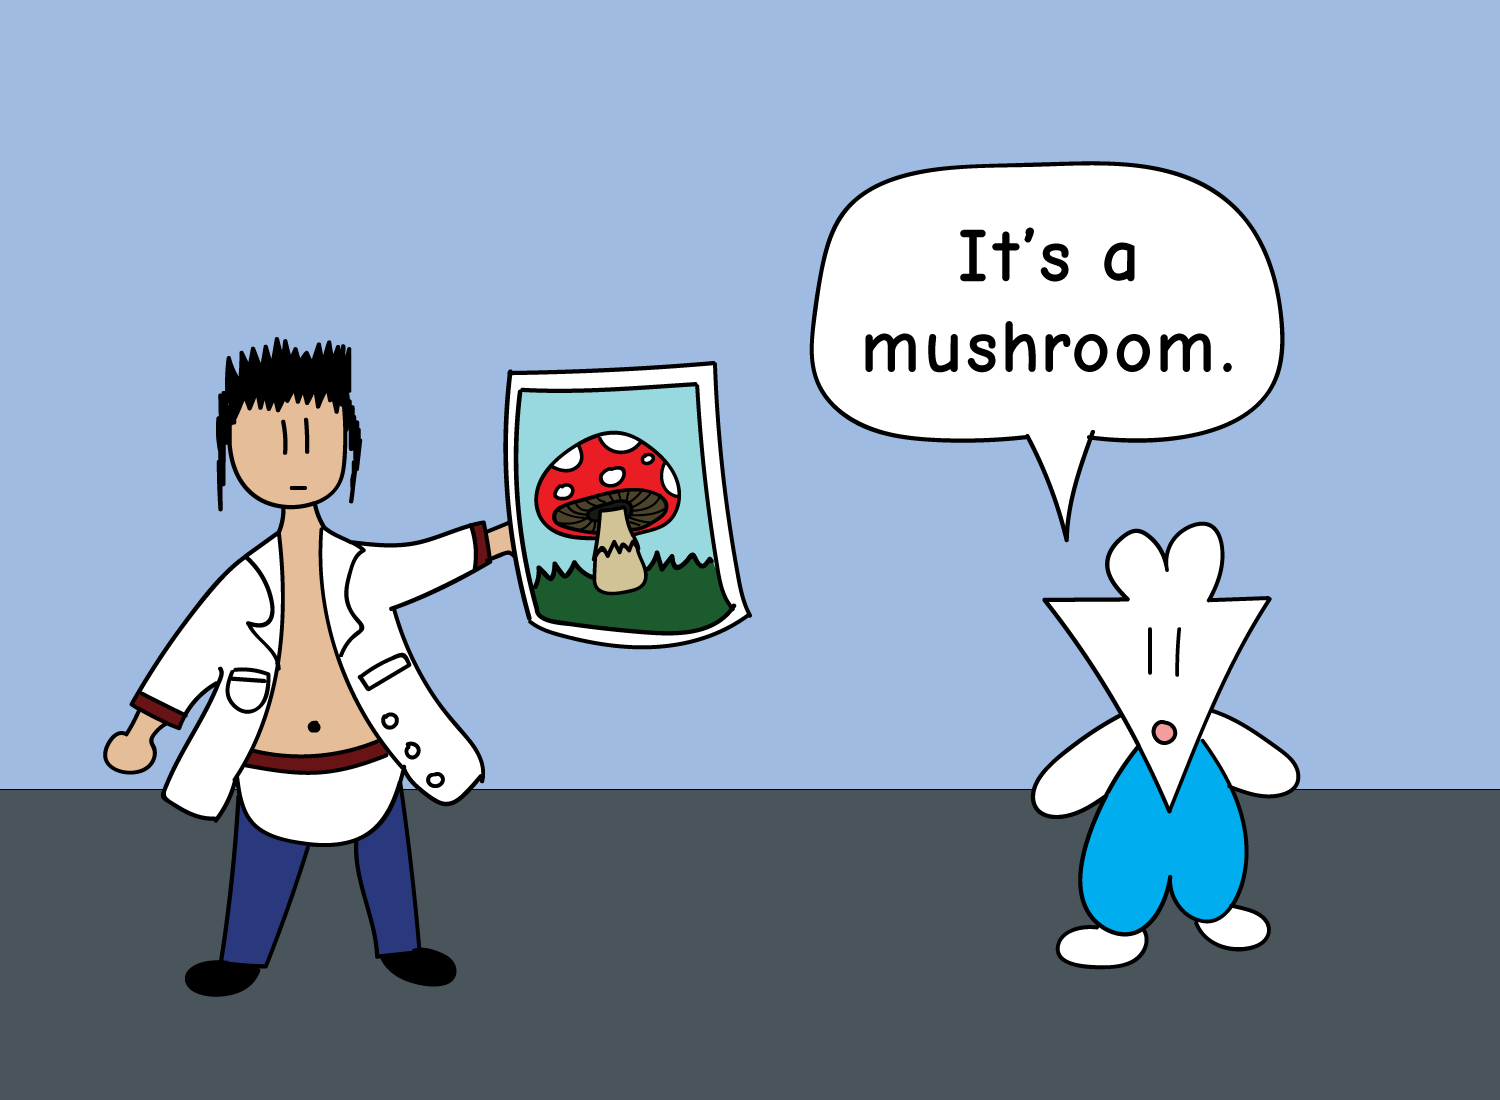 A mushroom experiment - replying to it